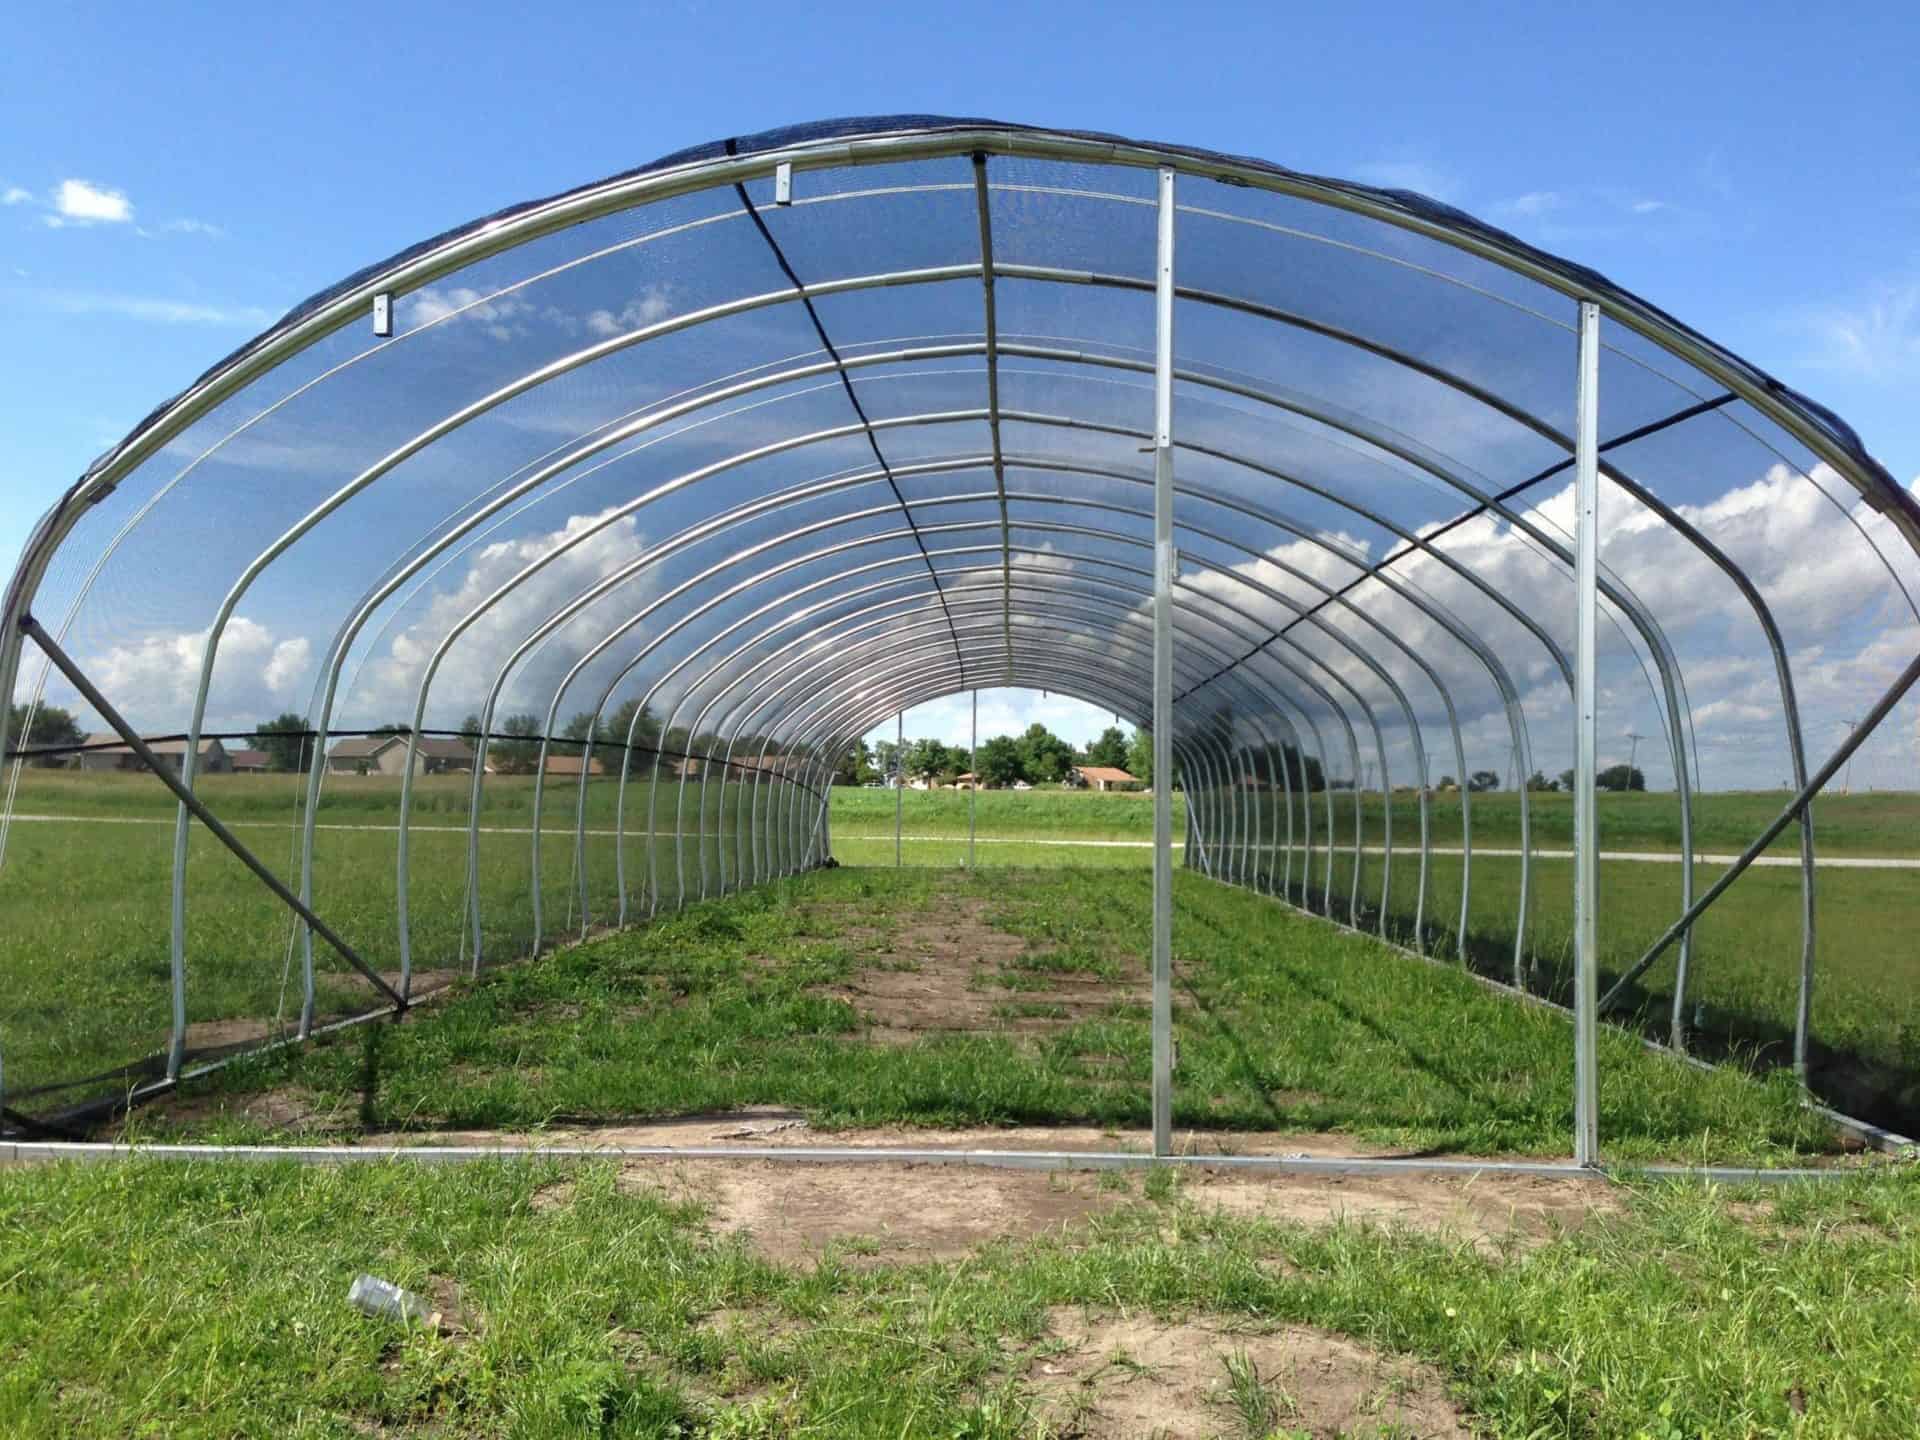 The Finished Hoop House